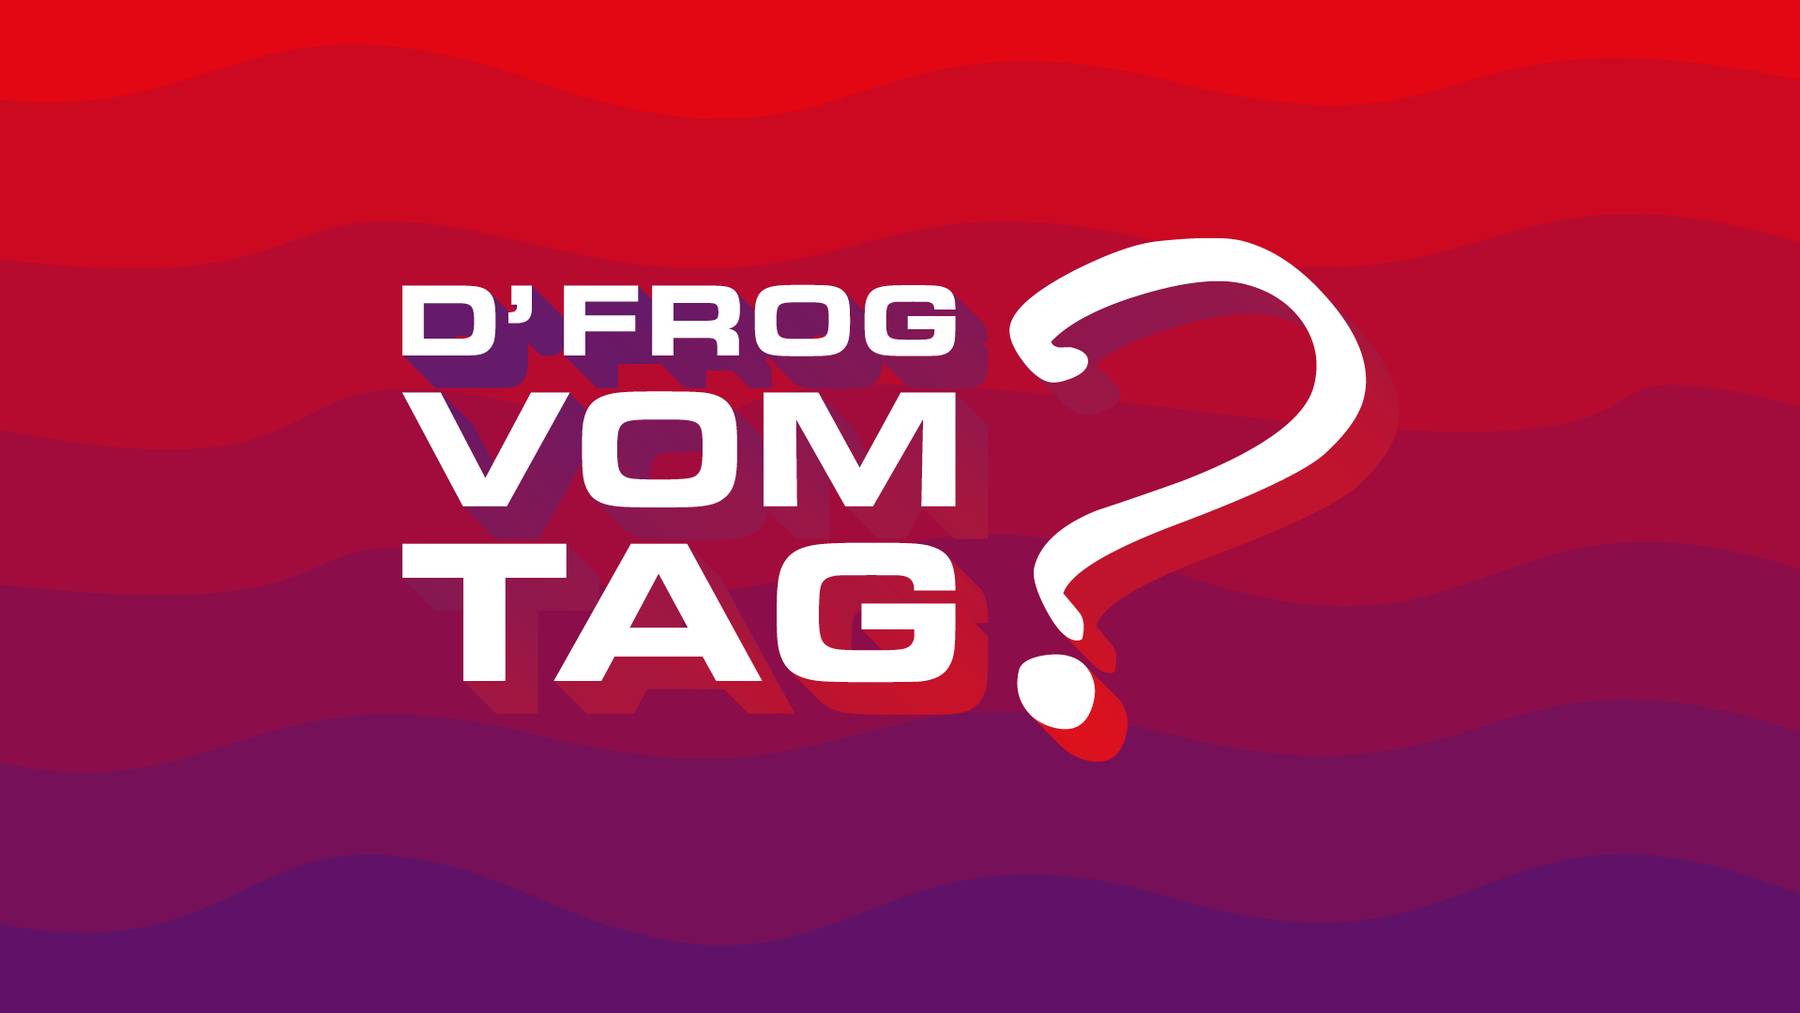 D' Frog vom Tag